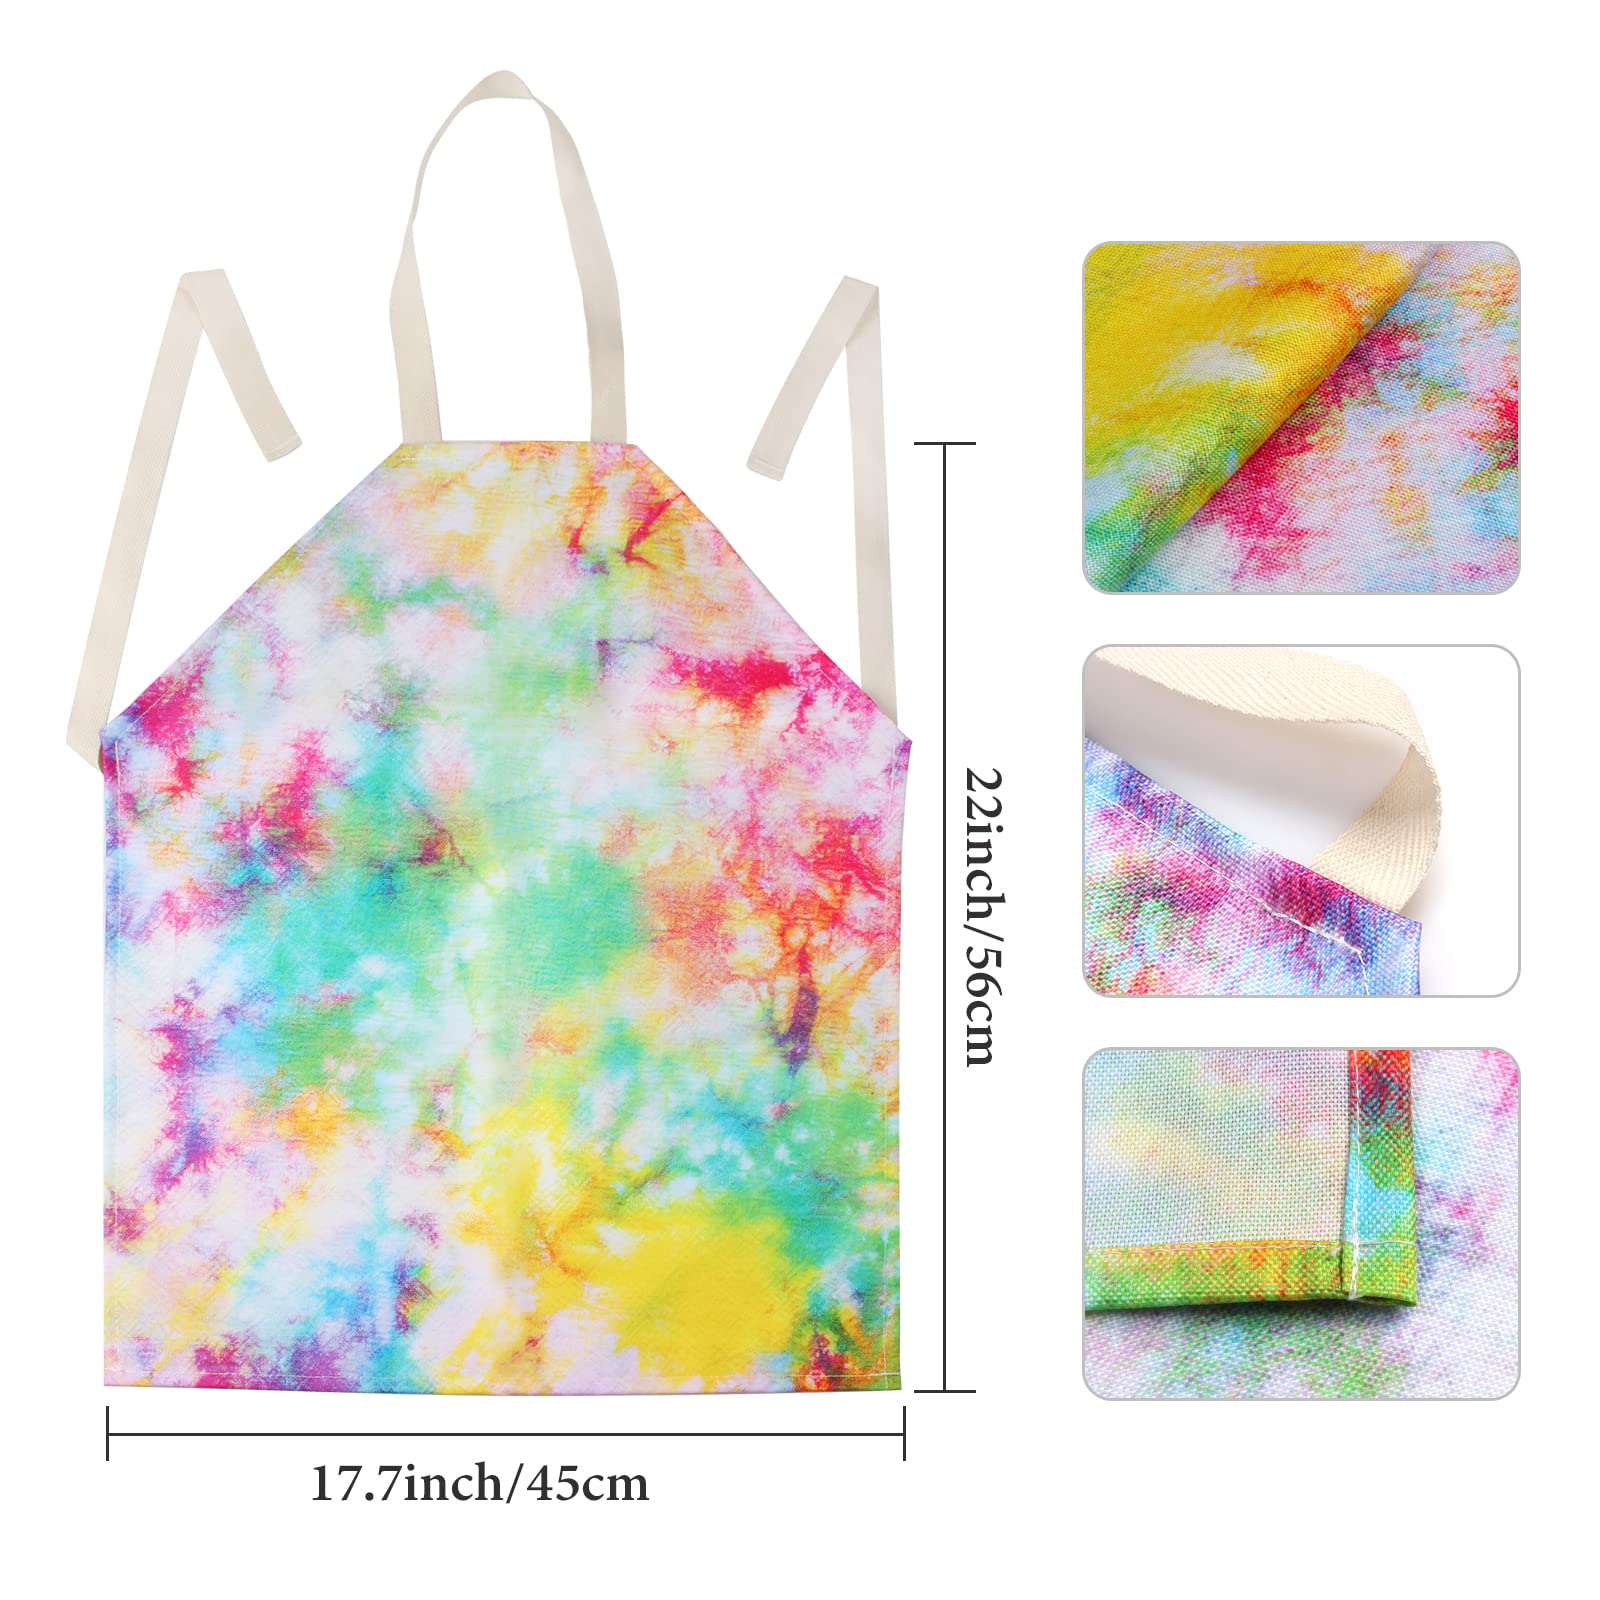 Keymall Kids Artist Costume Accessories Set Painter Dress-Up with Beret Hat Tie Dye Apron for Halloween Career Day Costume